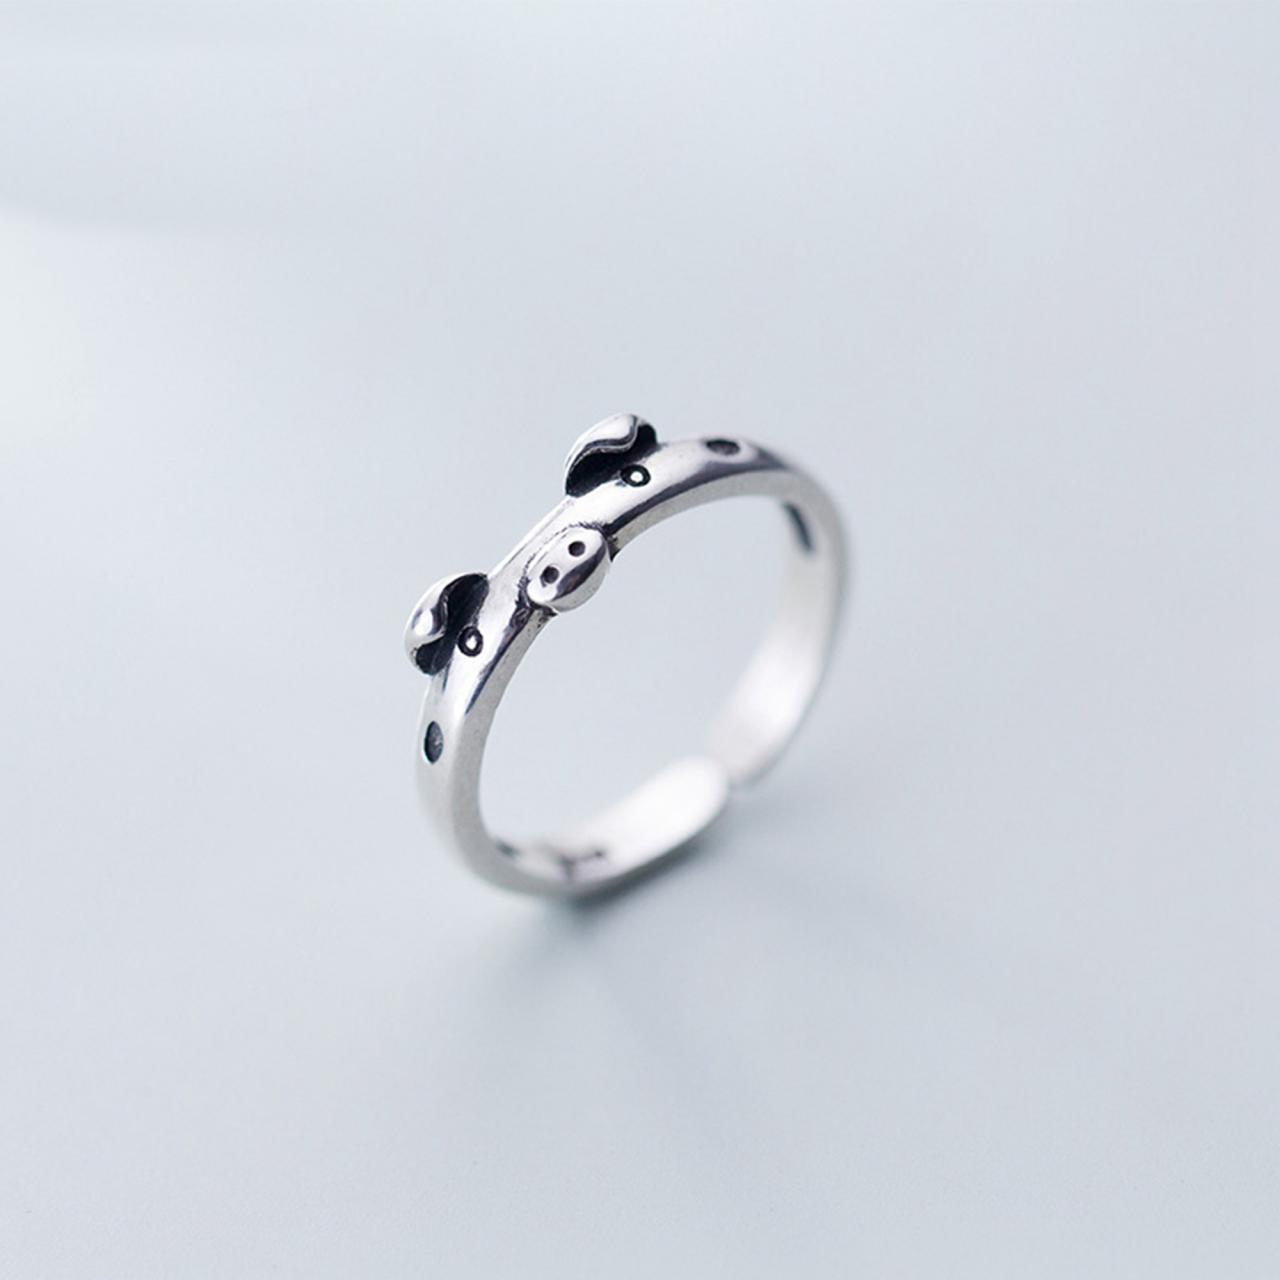 Glossy Pig Ring, Sterling Silver Adjustable Pig Ring, Minimalist Rings, Dainty Ring, Women Ring, Everyday Jewelry, Japanese Pig Ring